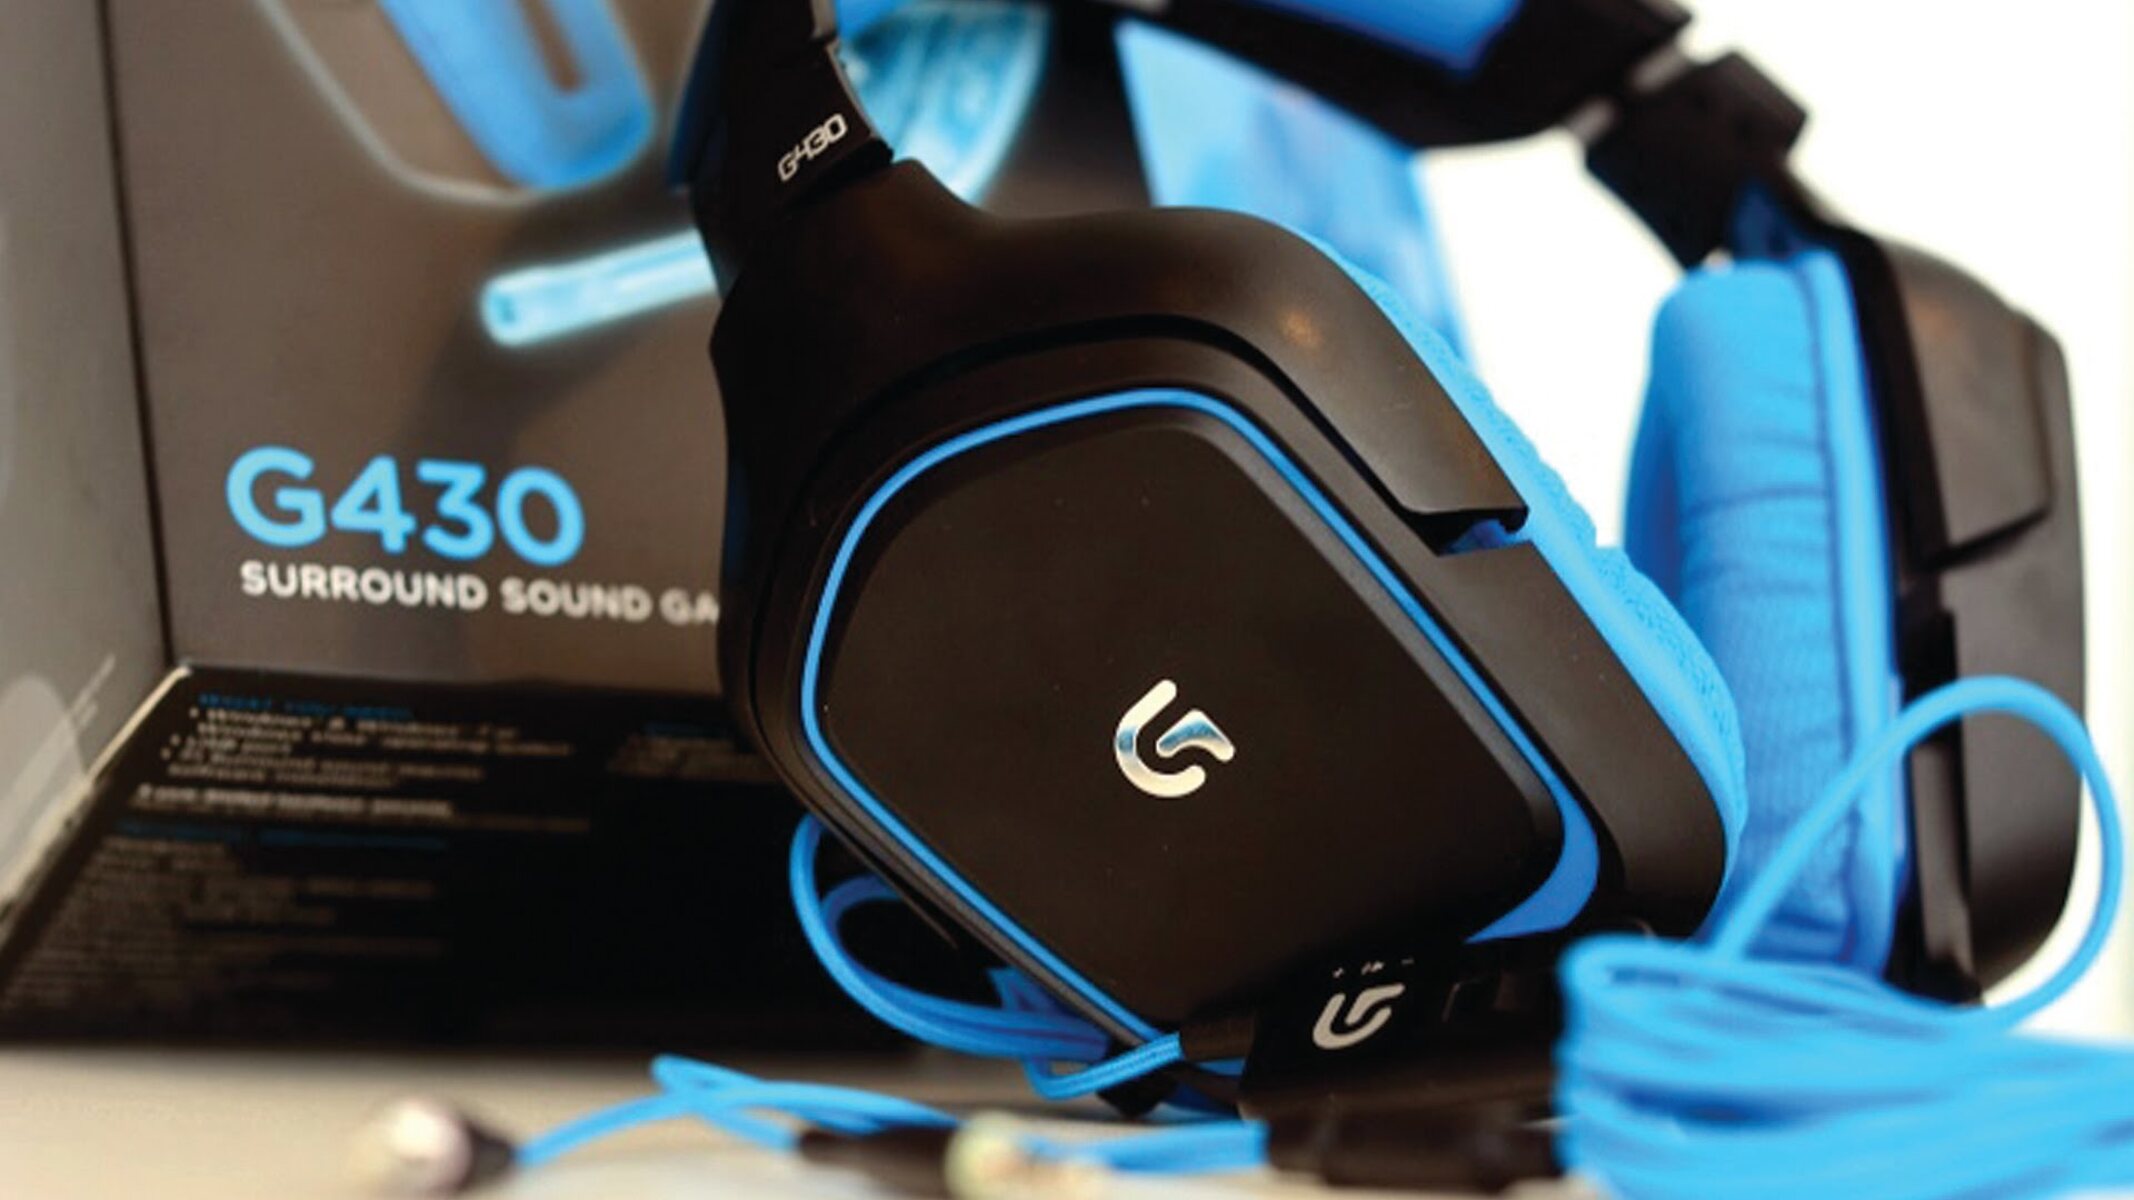 How To Select Logitech 430 Gaming Headset As Sound Output